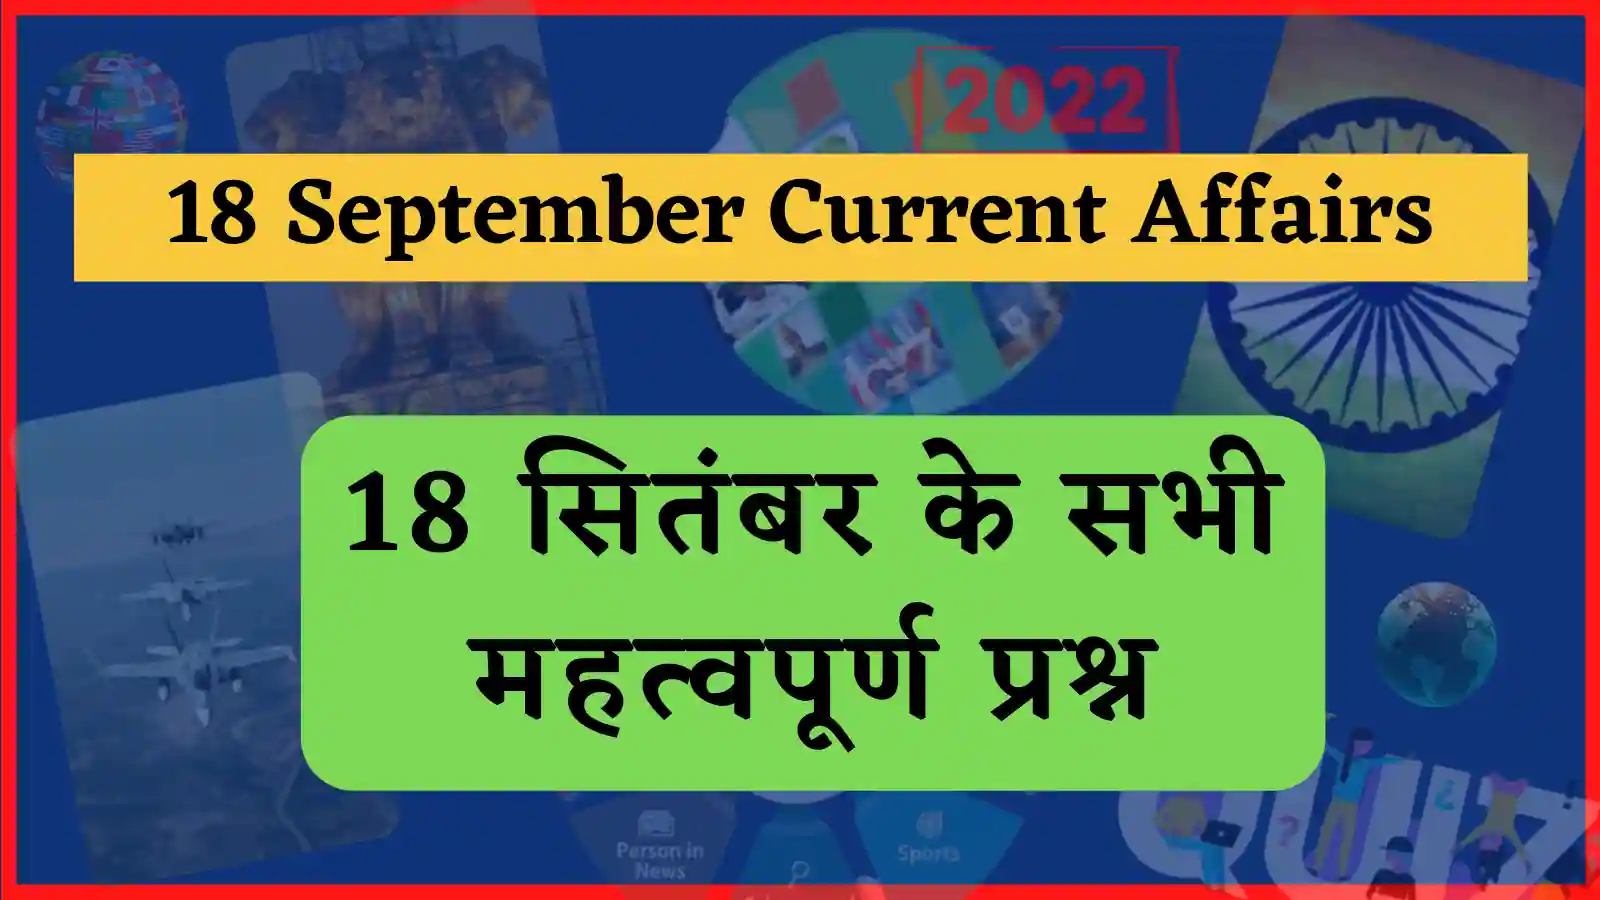 18 September 2022 Current Affairs in Hindi